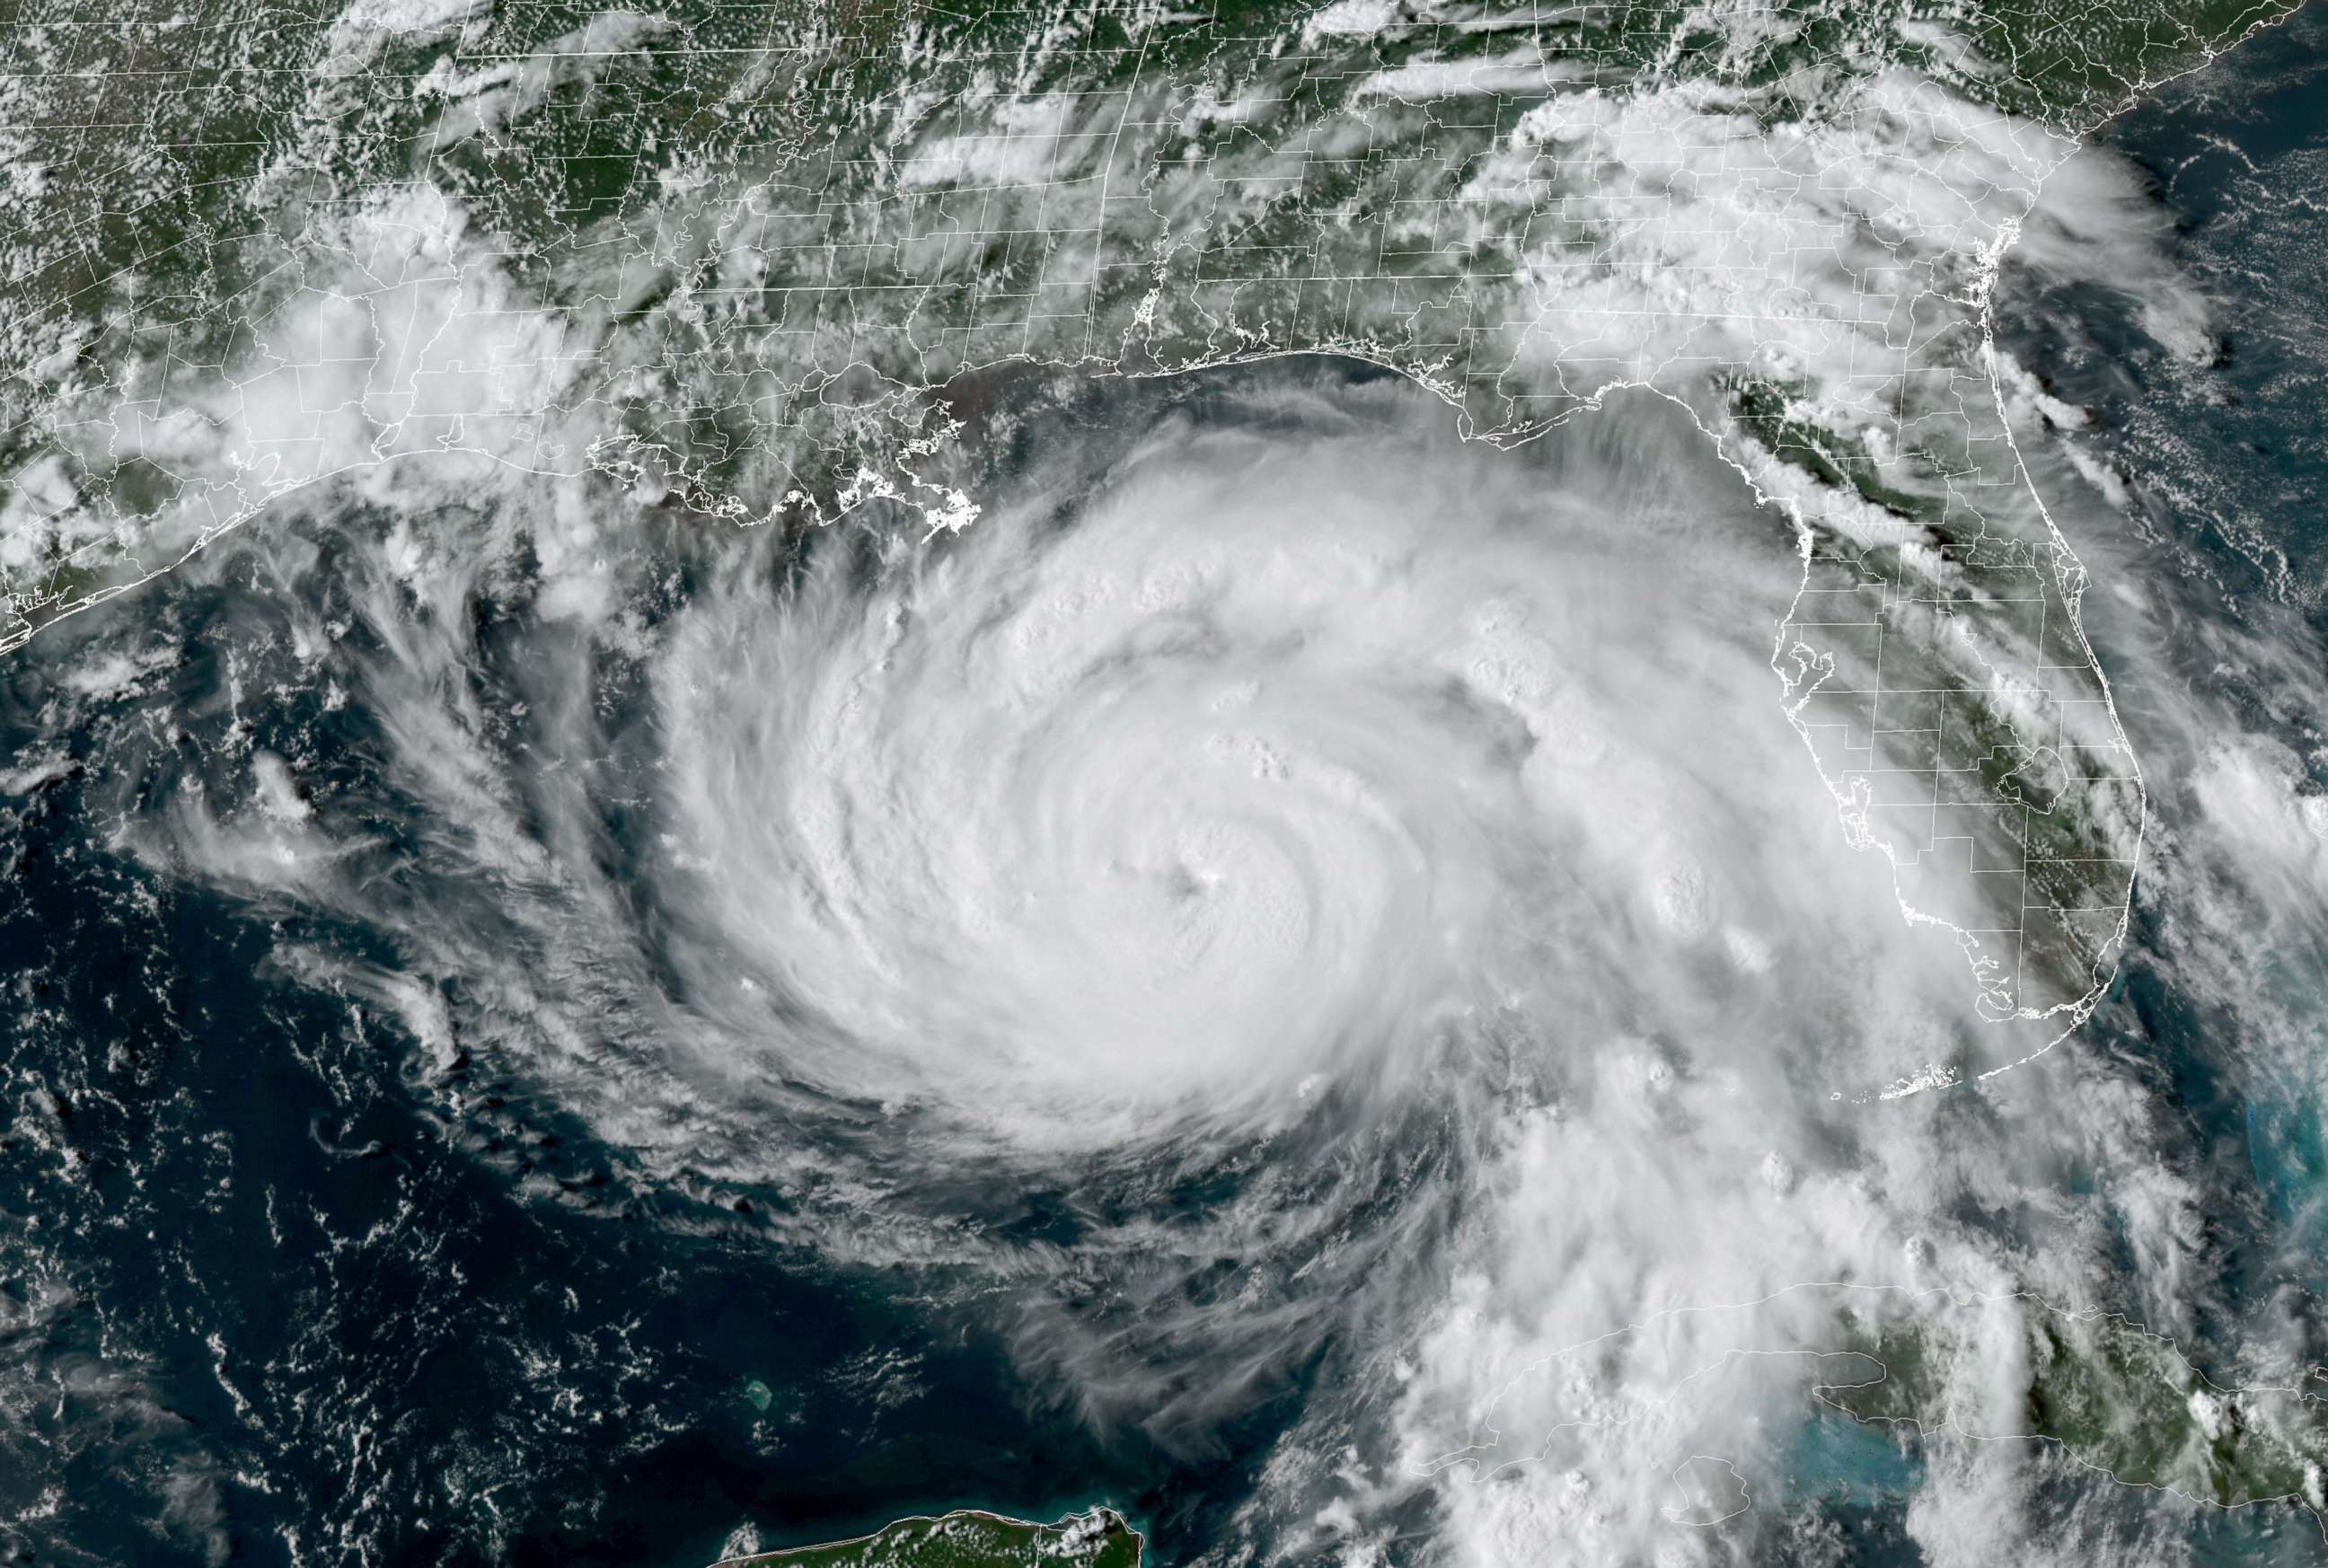 PHOTO: This National Oceanic and Atmospheric Administration/GOES satellite handout image shows Hurricane Ida at 5:01 p.m. ET, on Aug. 28, 2021.